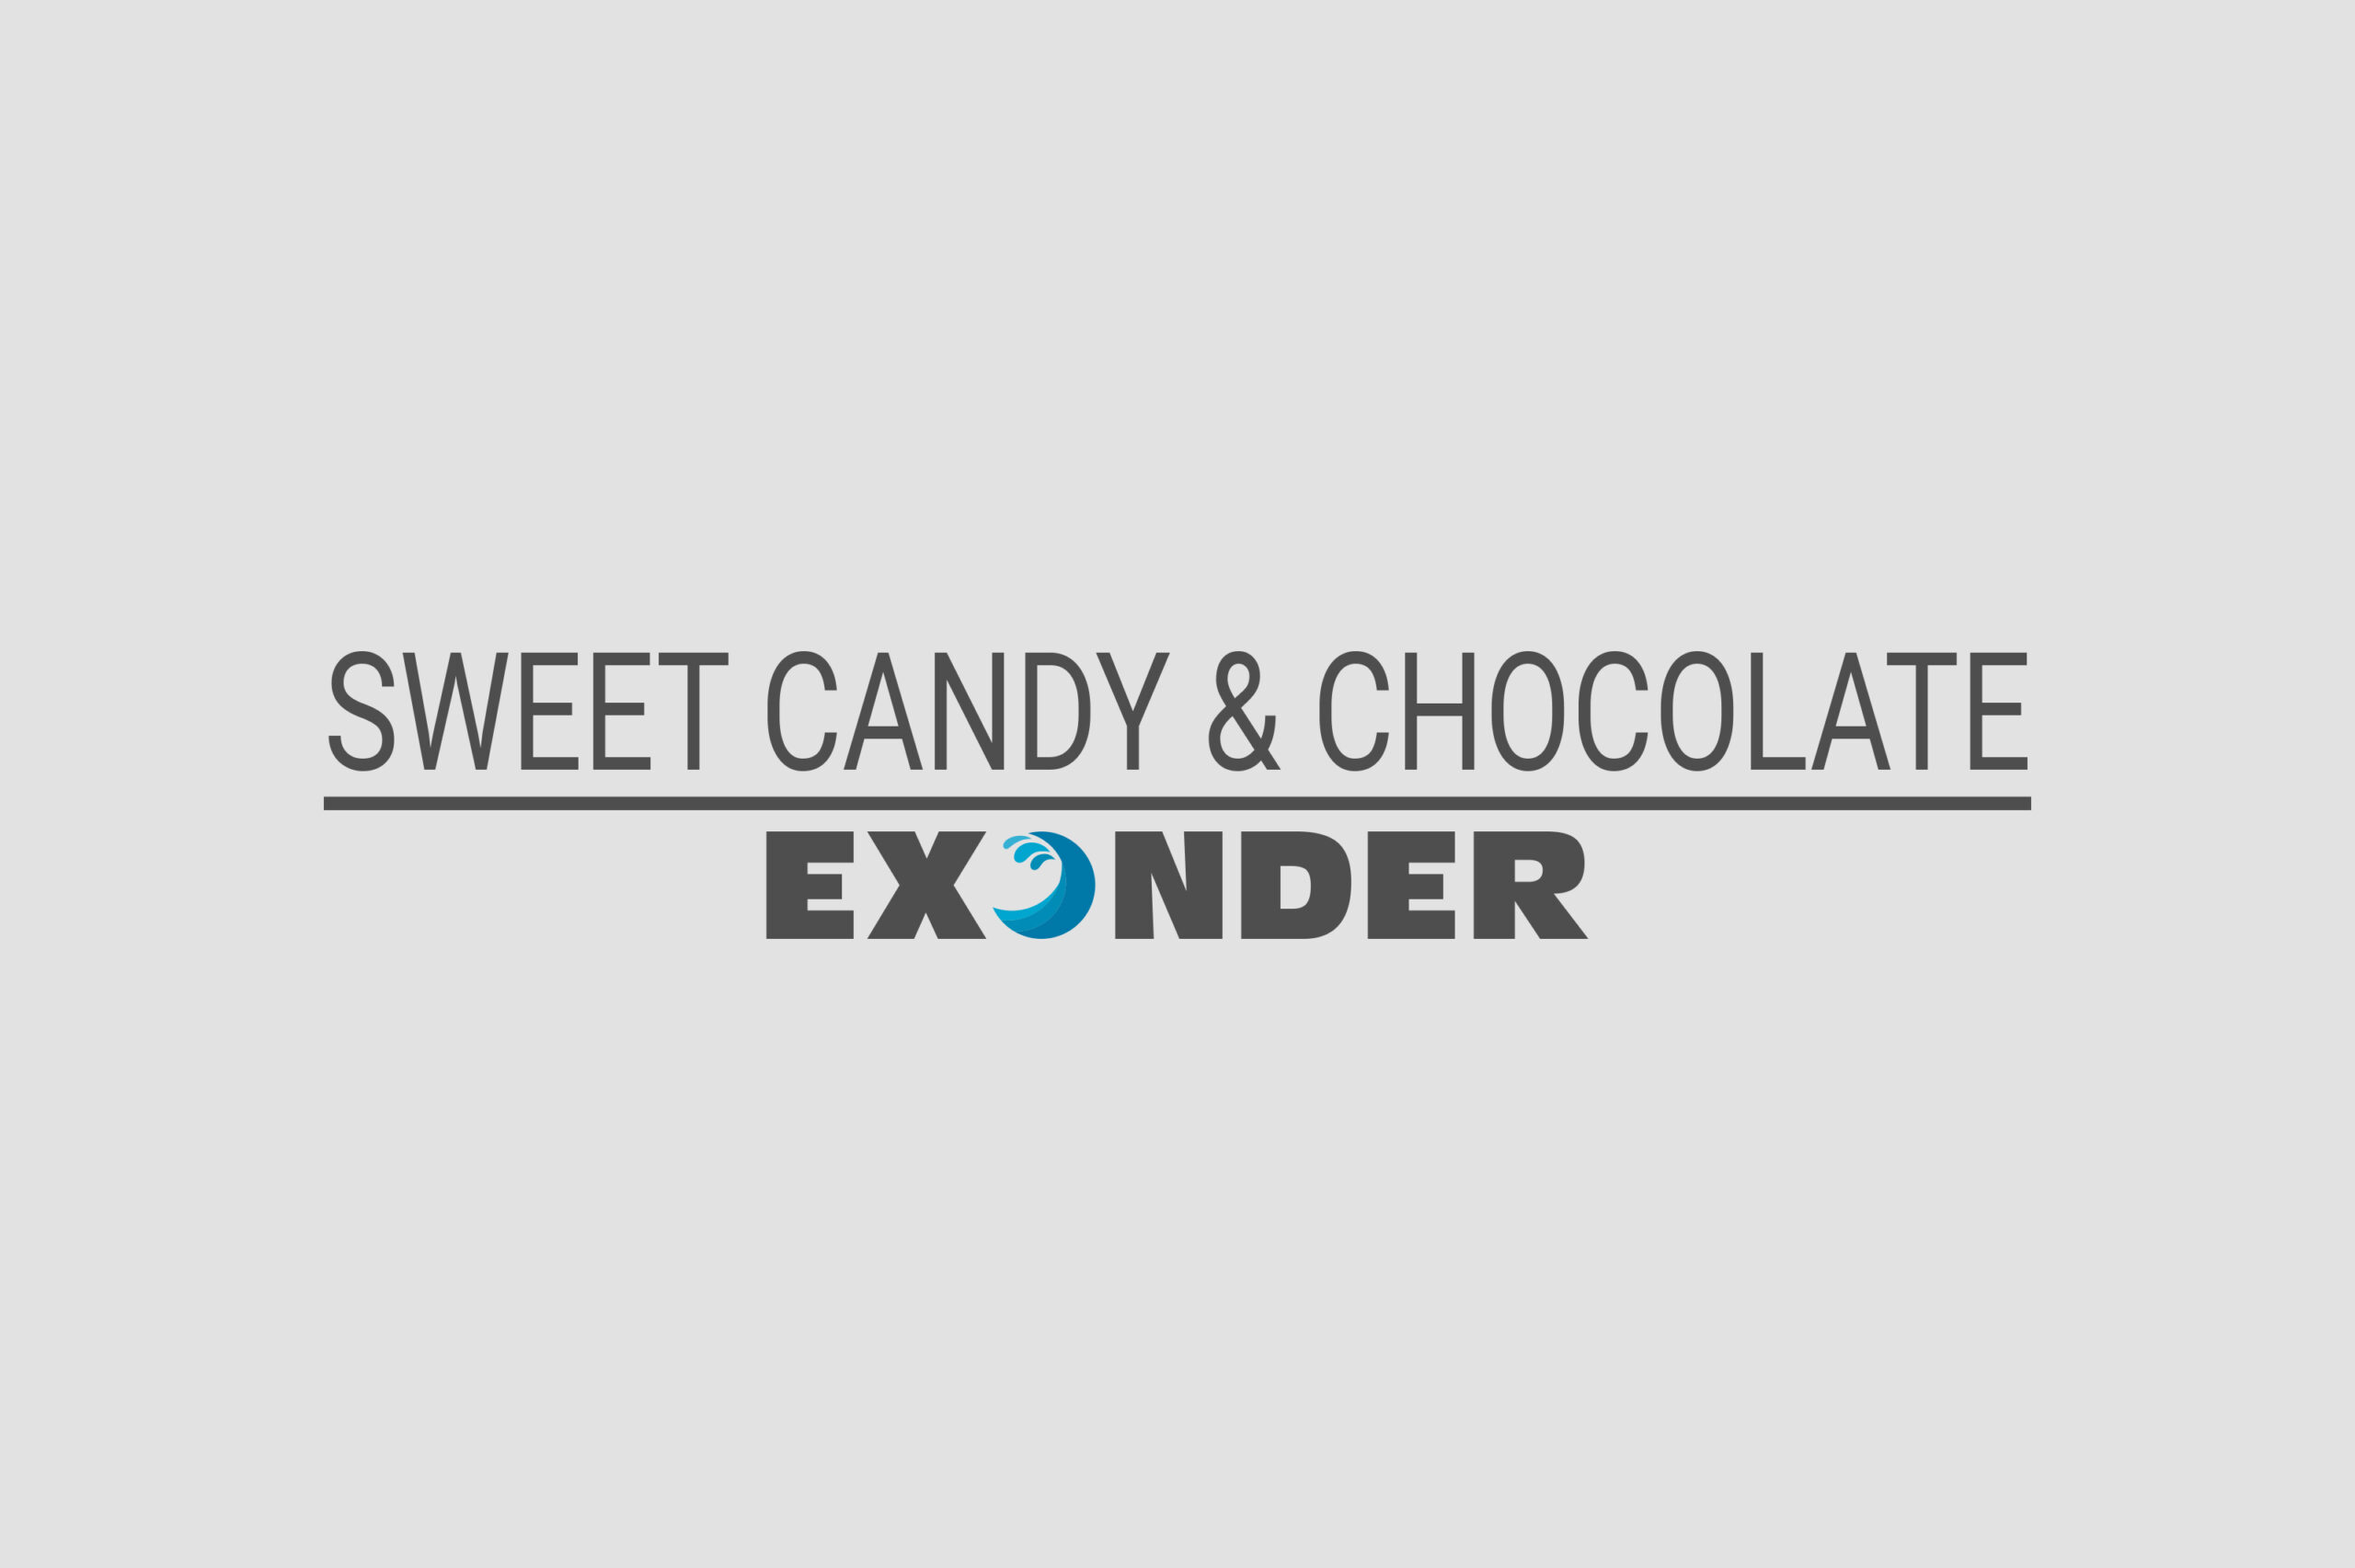 Al momento stai visualizzando <strong>Exonder for SWEET, CANDY & CHOCOLATE  – n.5 Febbraio 2023</strong>